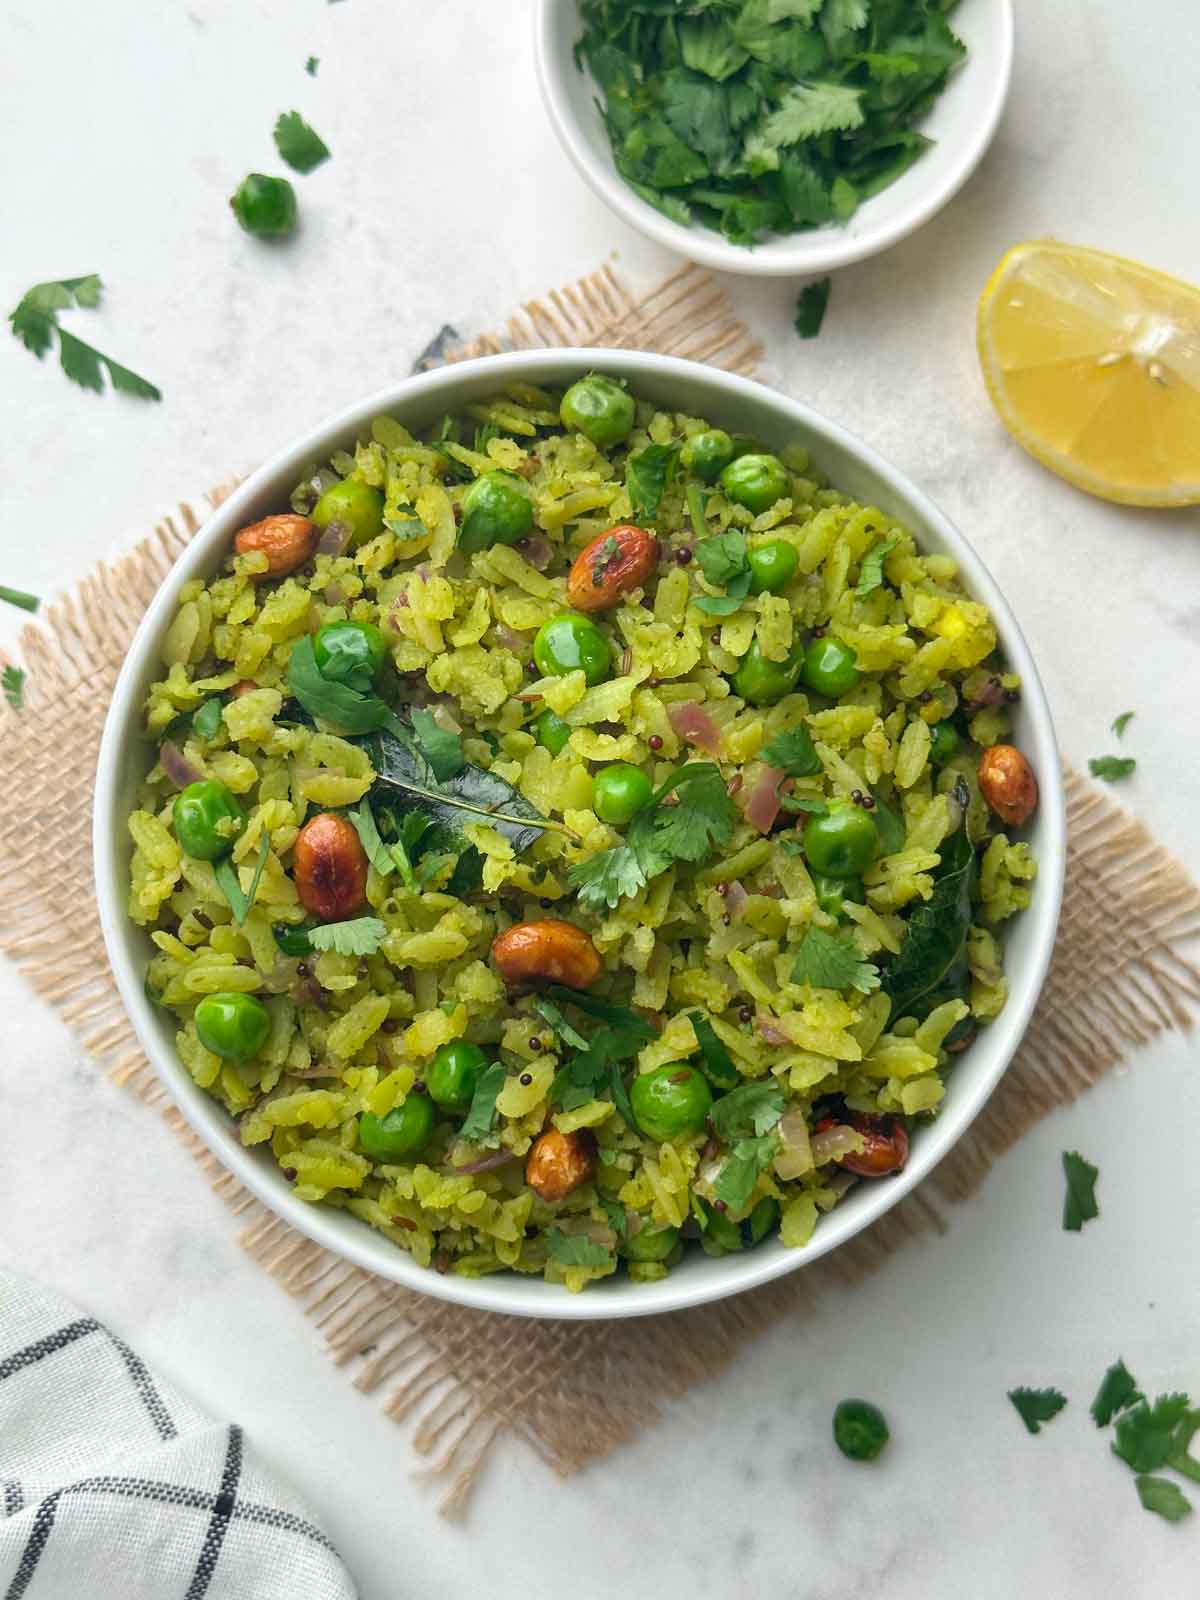 hariyali poha served in a bowl with coriander leaves and lemon wedge on the side